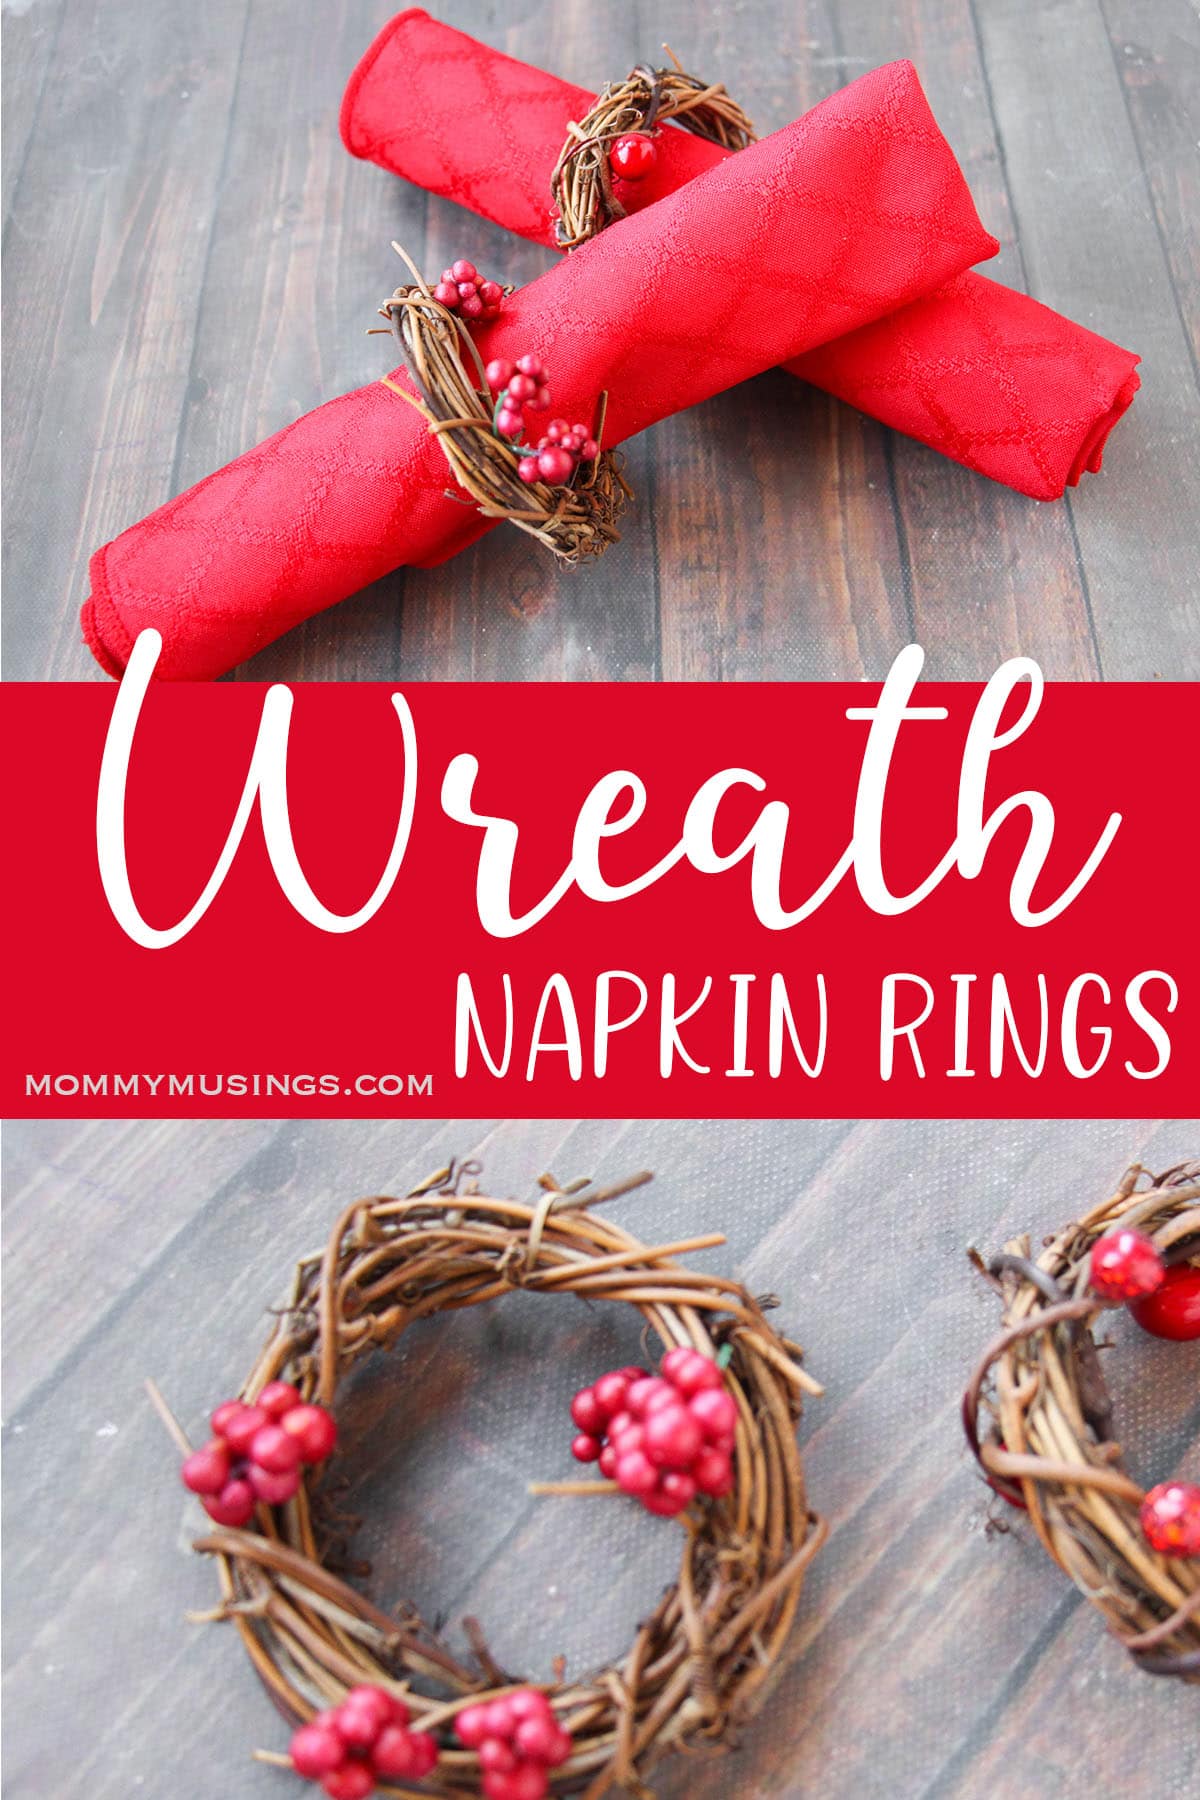 Pine Cone Napkin Rings: For Rustic Thanksgiving Table